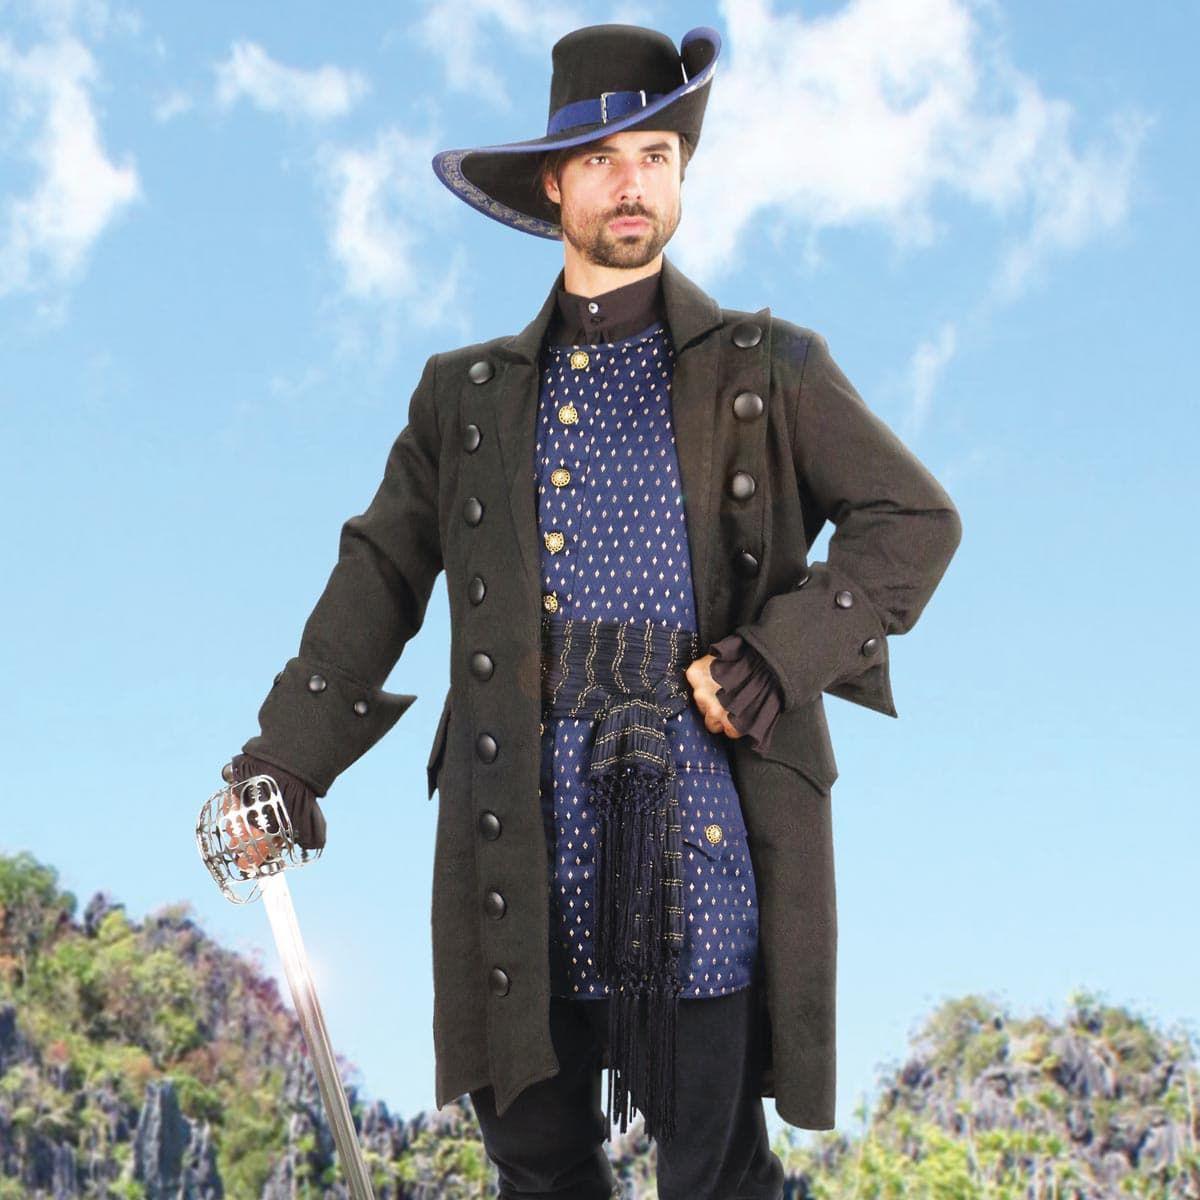 Blackbeard’s black brocade pirate coat has an open front, leather-covered buttons, wide cuffs, and a black satin lining